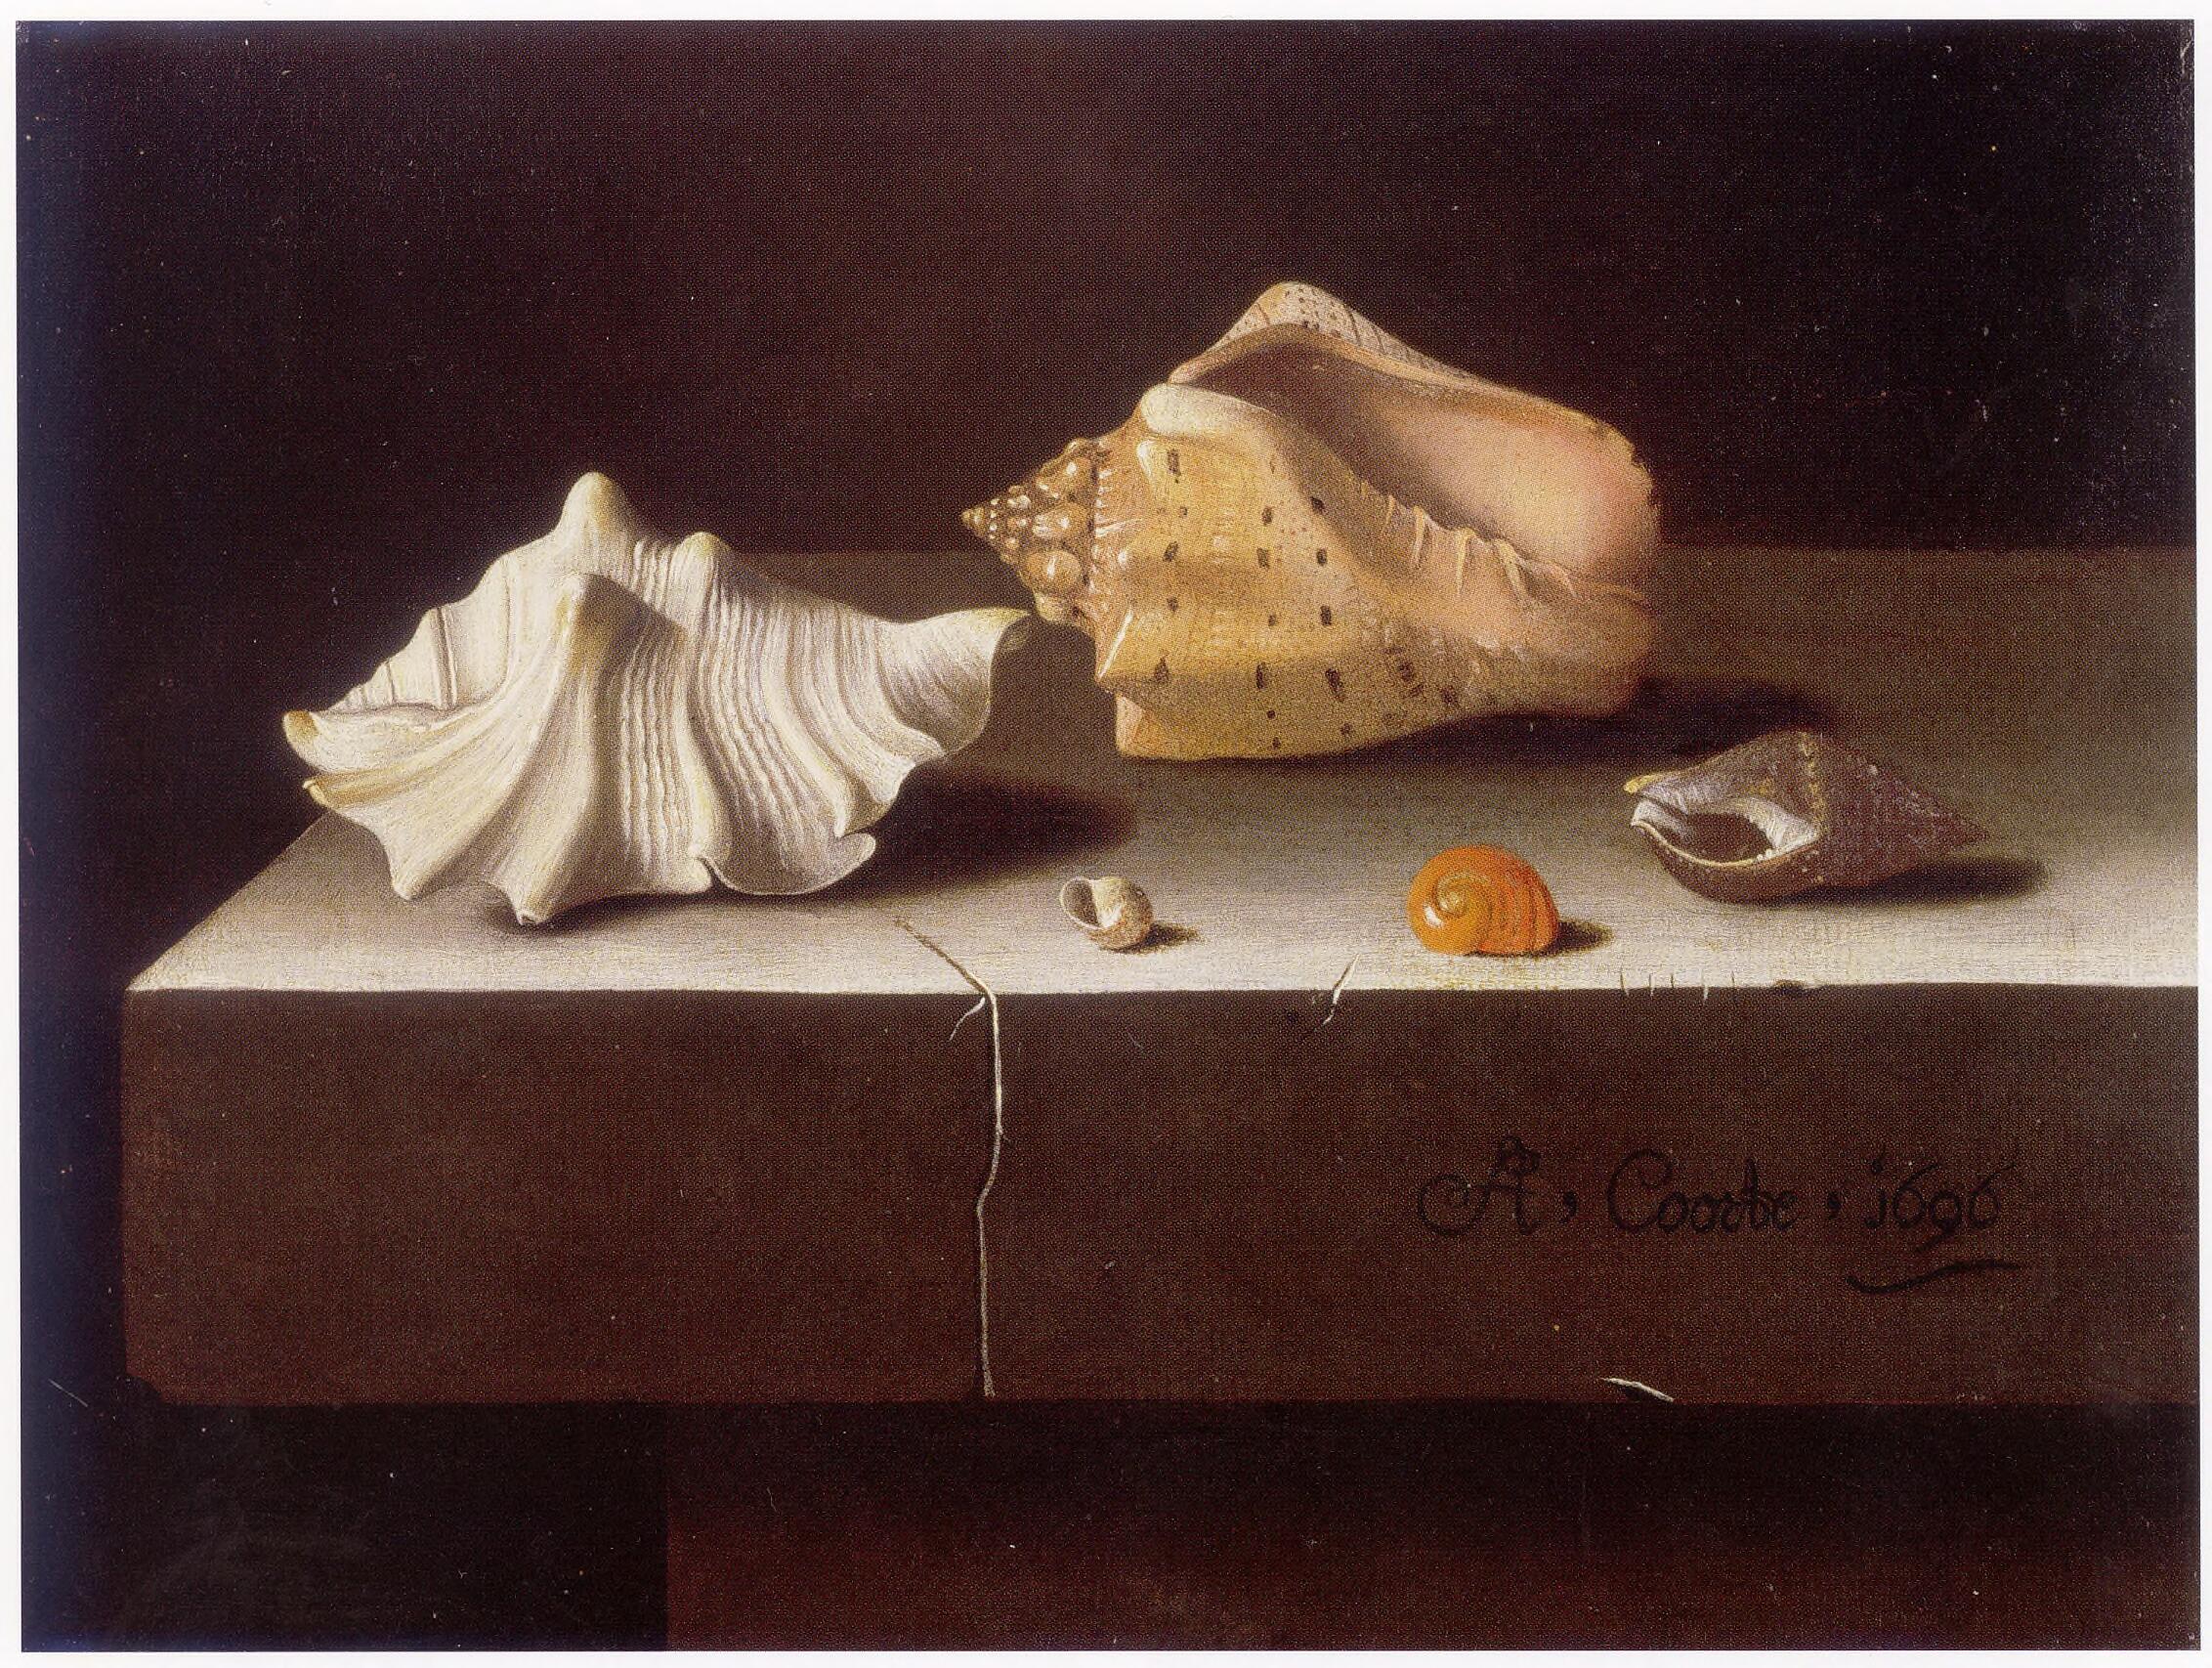 Adrienne Coorte
“Two Large and Three Small Shells on a Slab of Stone”
Oil on paper on panel, 6×9 inches, 1696